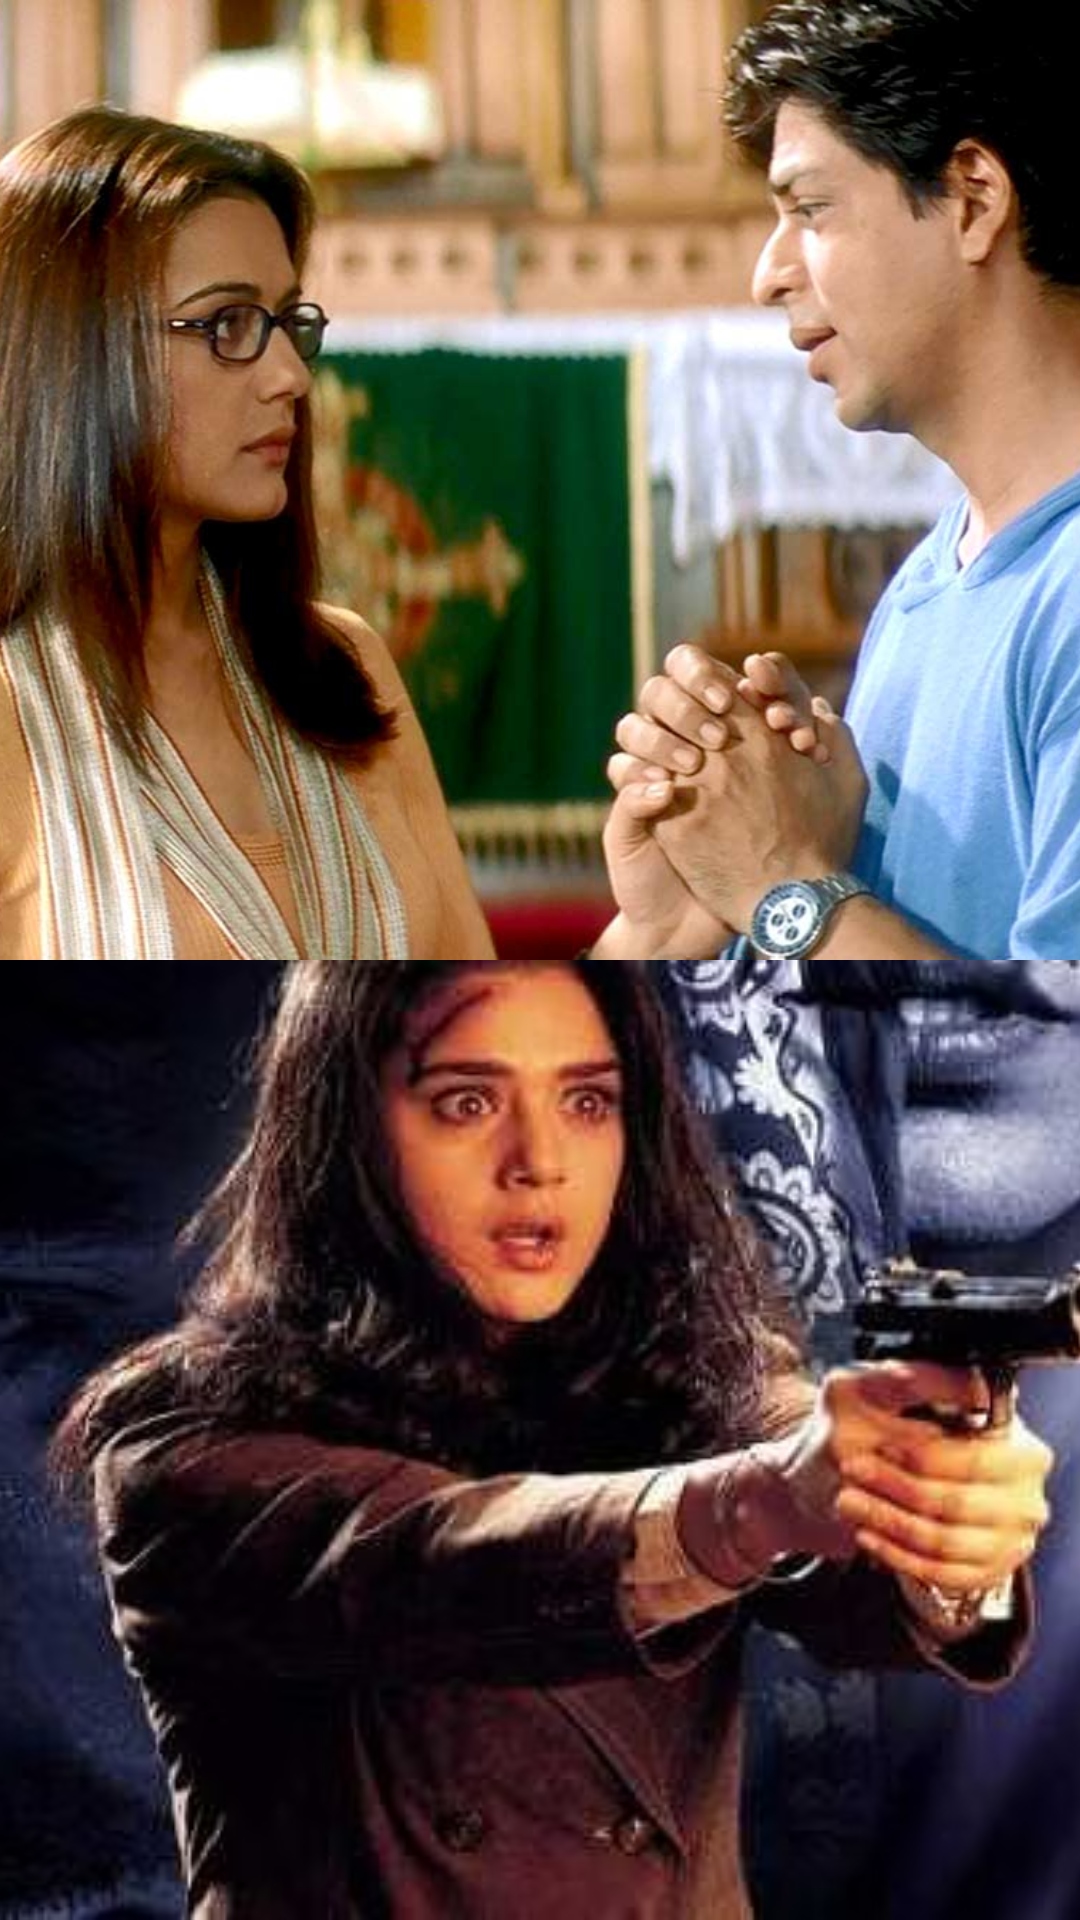 Kal Ho Na Ho to Sangharsh, Preity Zinta's best movies to re-watch on her birthday